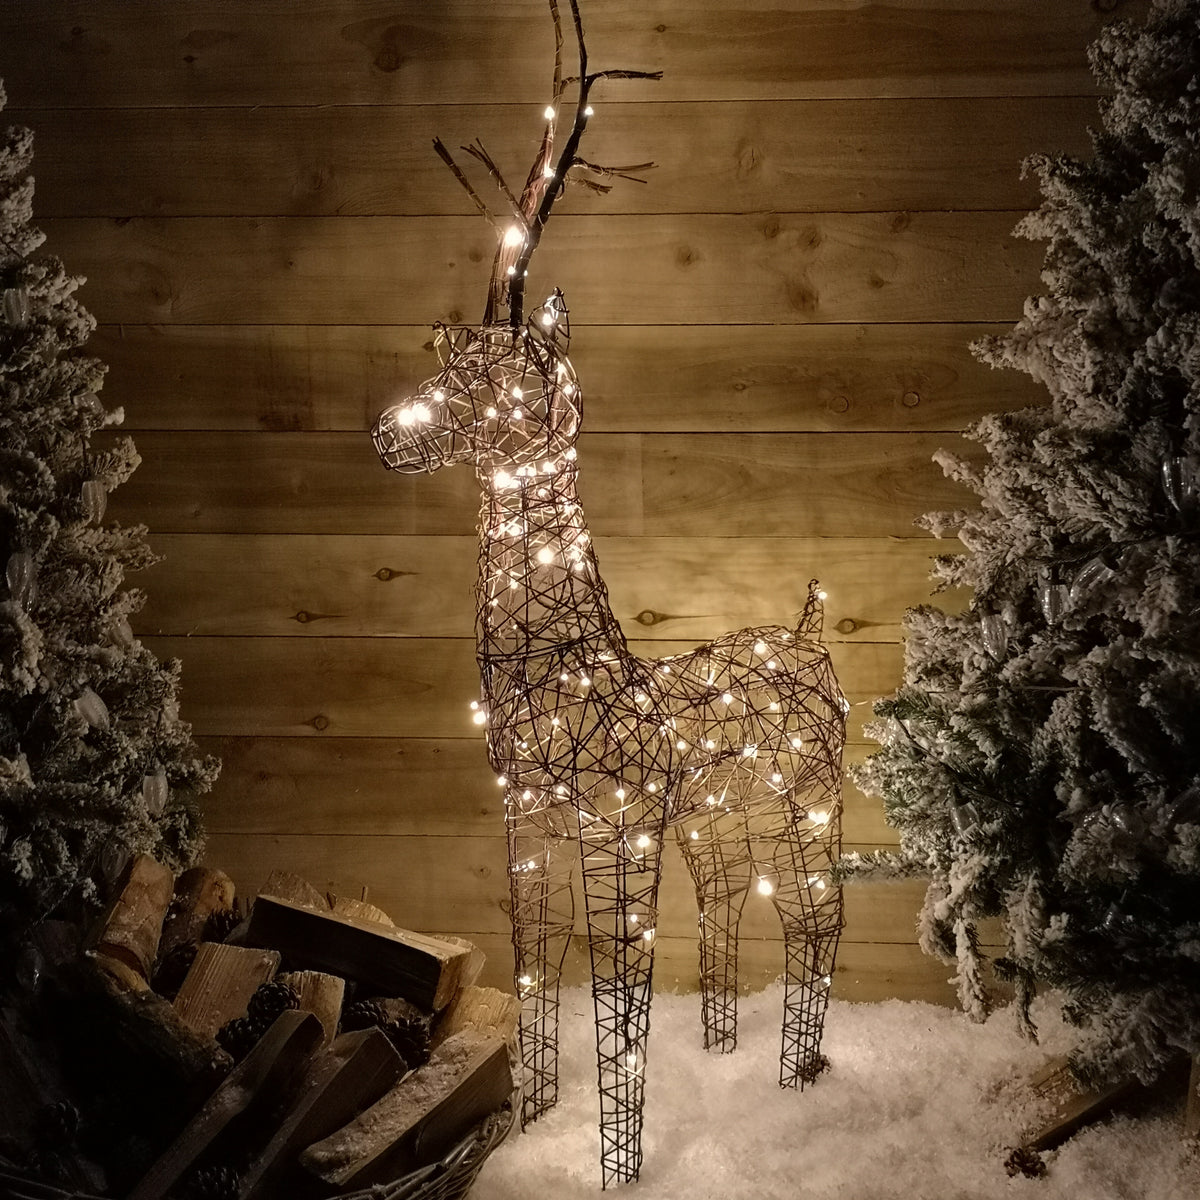 1m (53") Brown Outdoor Standing Wicker Reindeer Decoration With LED Lights